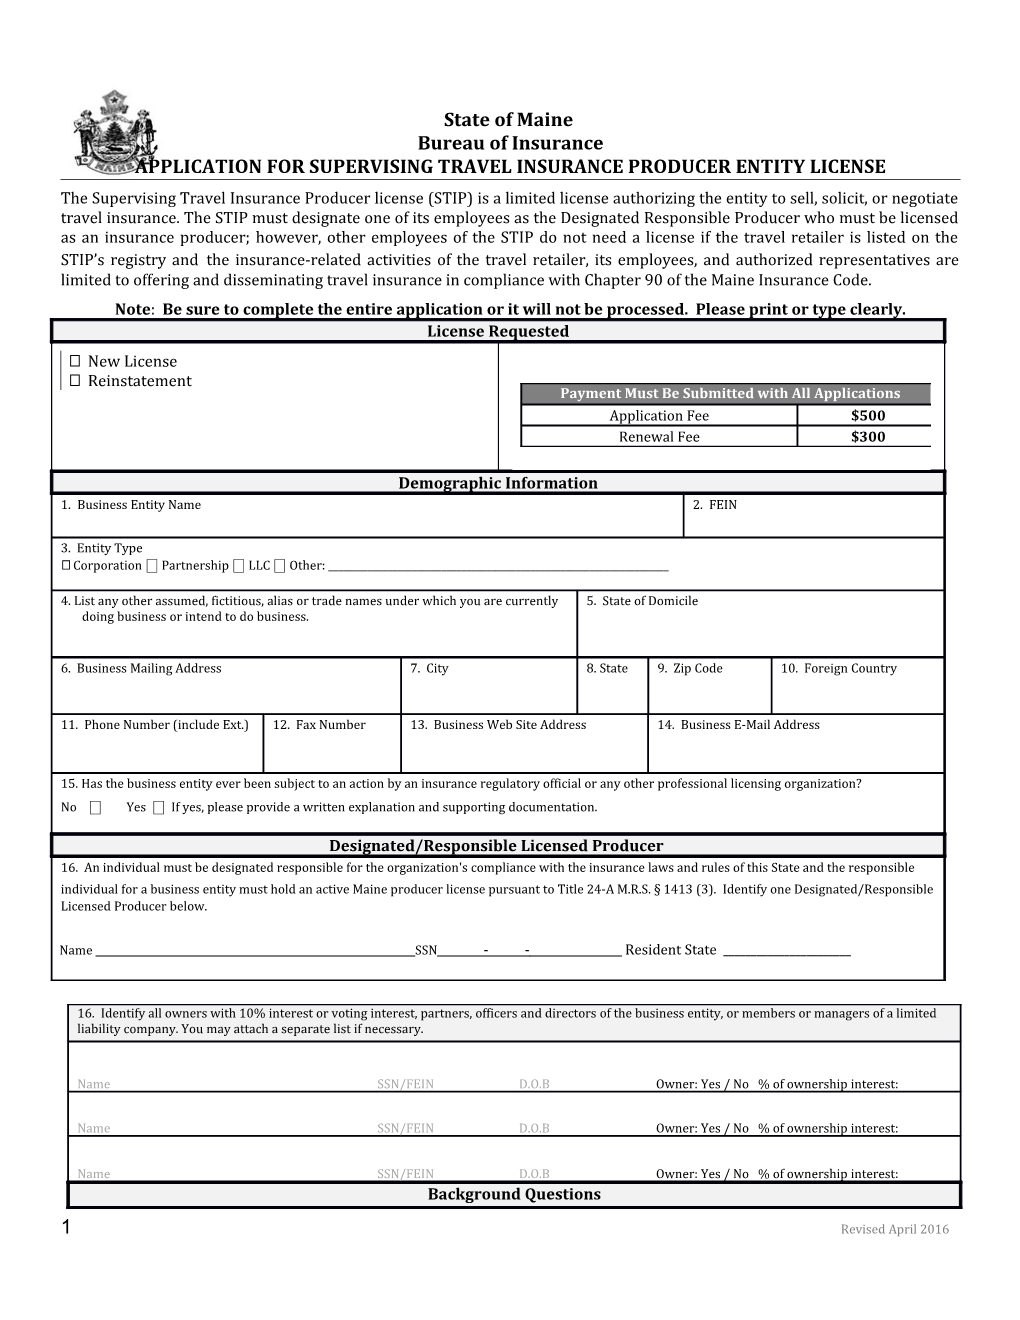 Application for Supervising Travel Insurance Producer Entity License